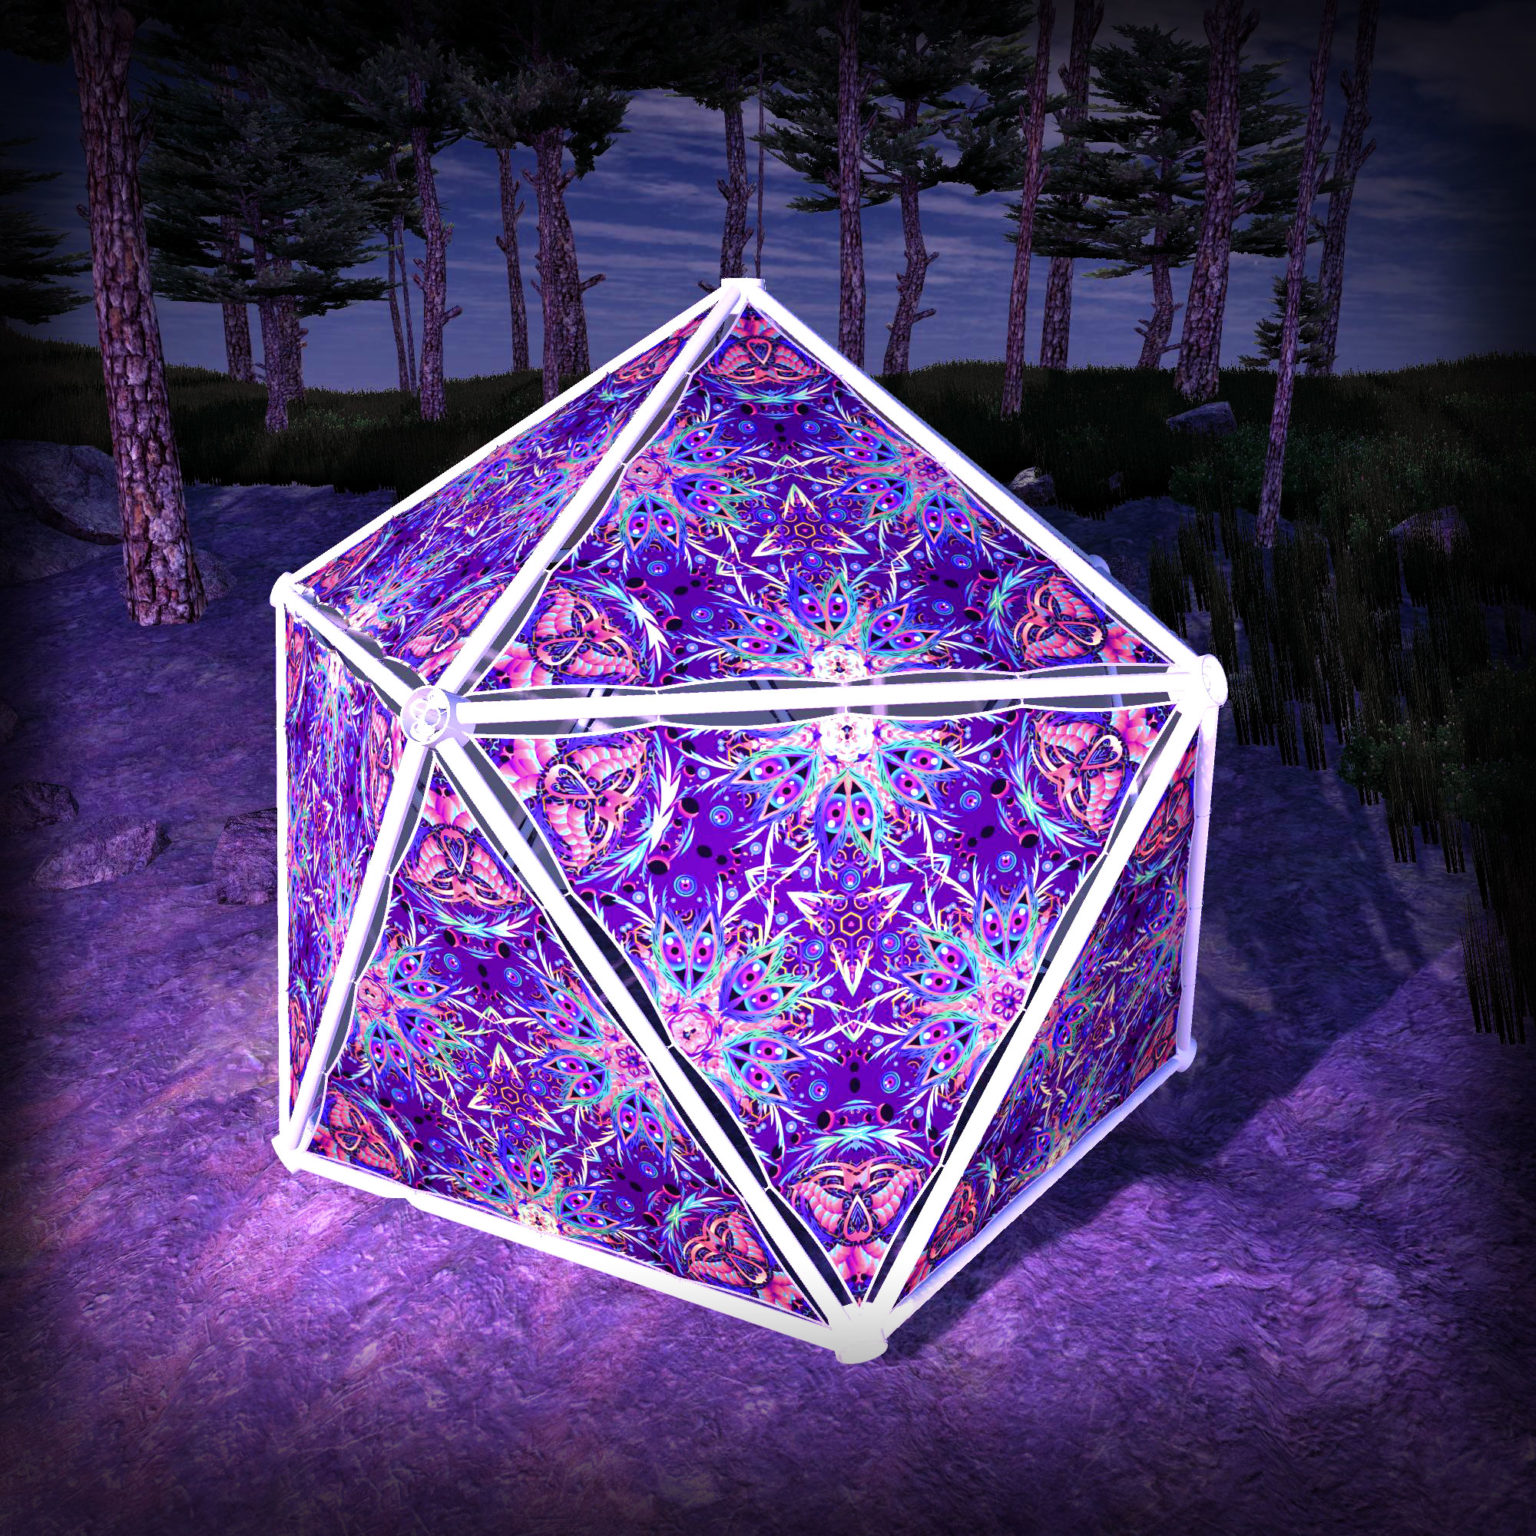 Jungle Snakes UV-Triangles - TR02 - Geodome - UV-Reactive Psychedelic Party Decoration - 3D Preview